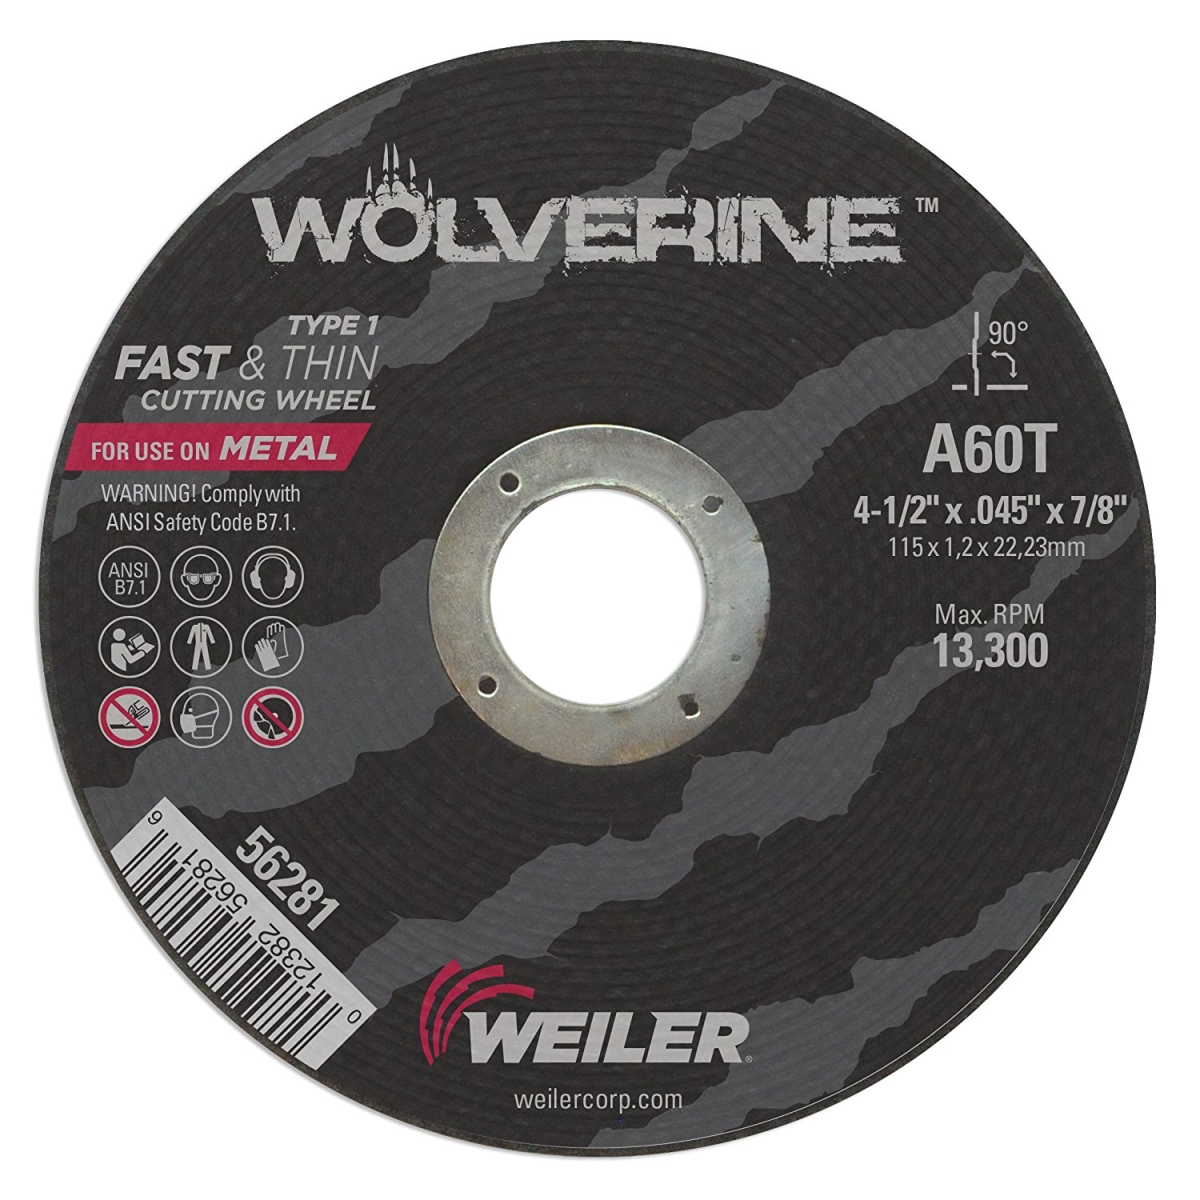 Picture of Weiler 804-56281 4.5 x .045 x 875 in. Wolverine Type 1 Thin Cutting Wheel, A60T